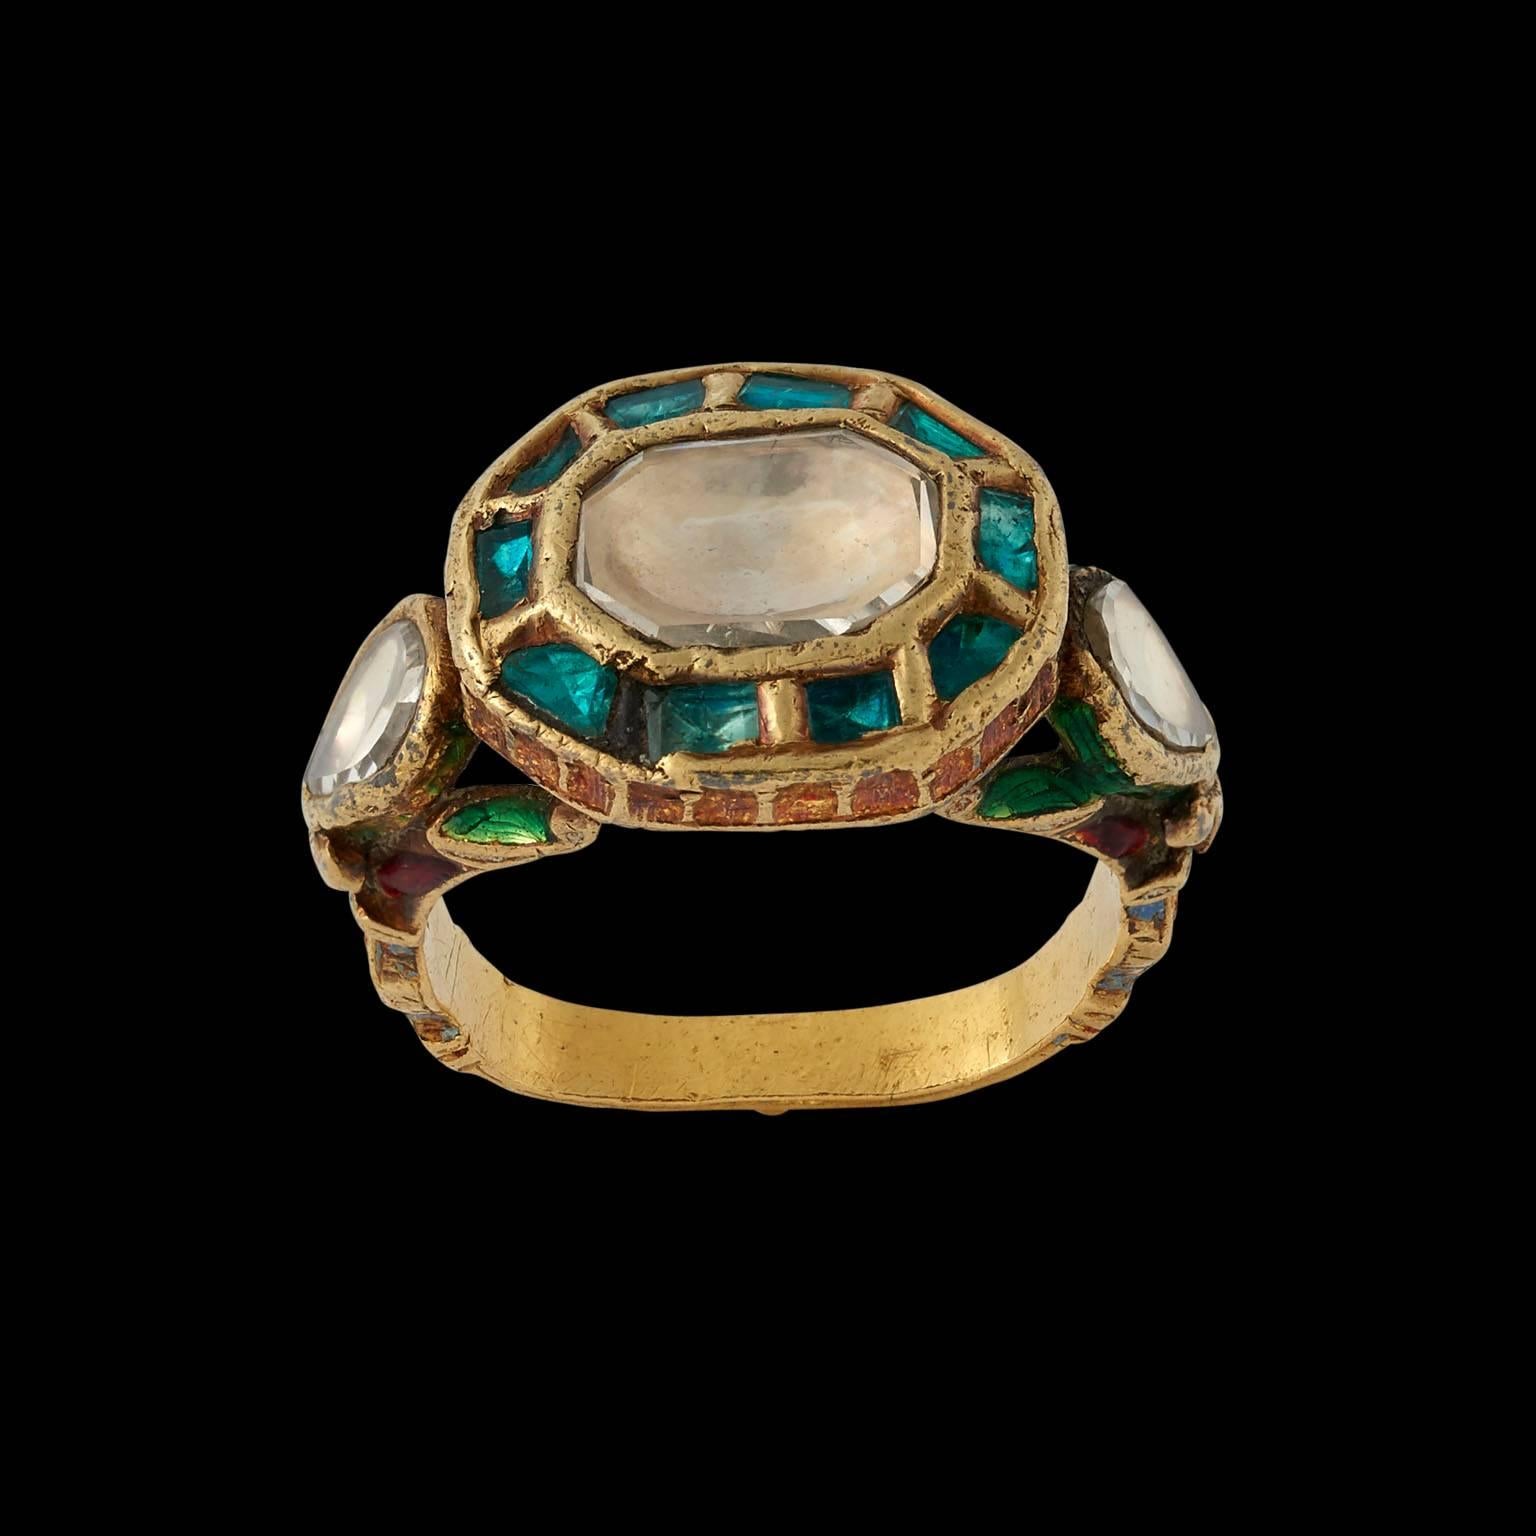 Ring
Rajastan, North India
19th century

Gold, enamel on the reverse, with a central diamond in a surround of emeralds and flanked by two diamonds on either shoulder.

UK Finger Size K